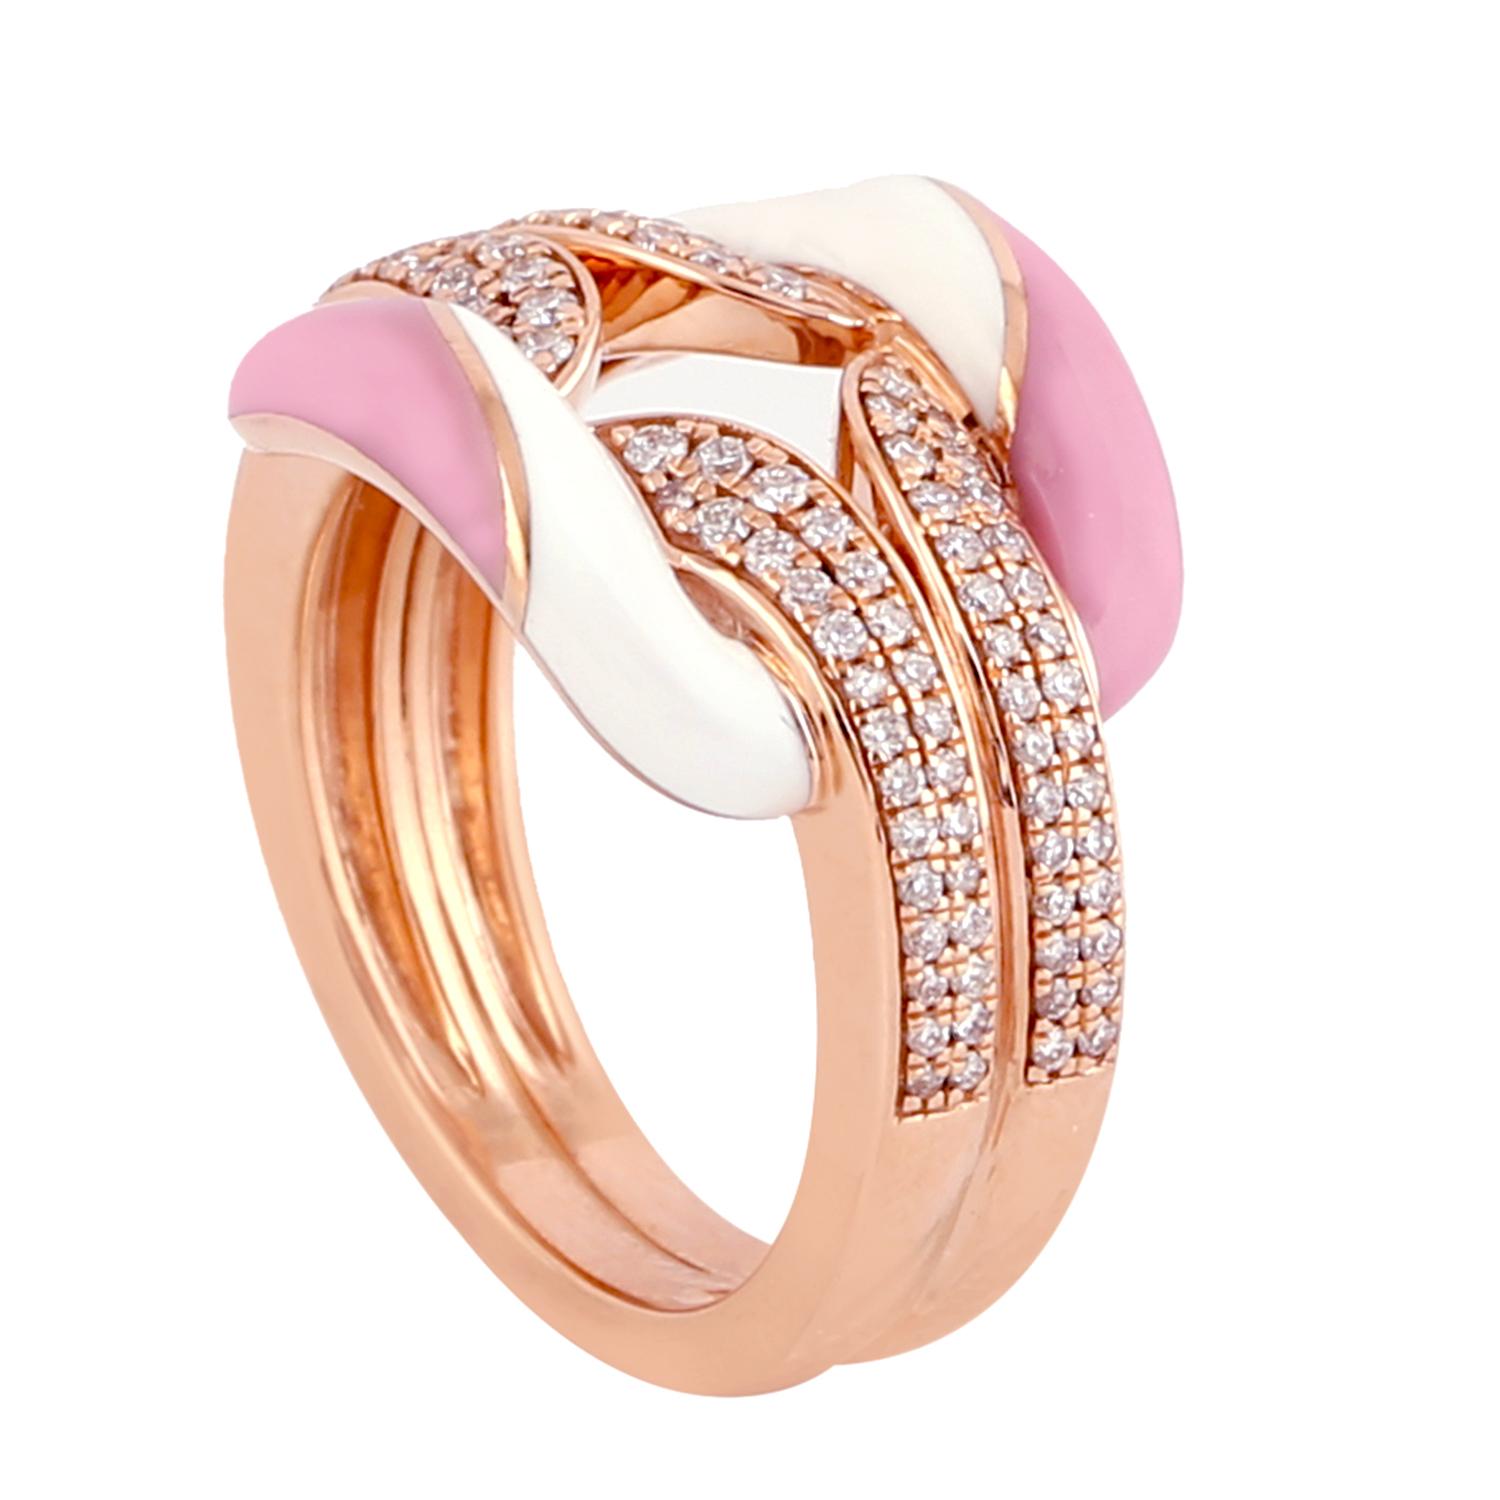 Pink & White Ceramic Inlay Ring with Vs Diamonds Made in 18k Rose Gold In New Condition For Sale In New York, NY